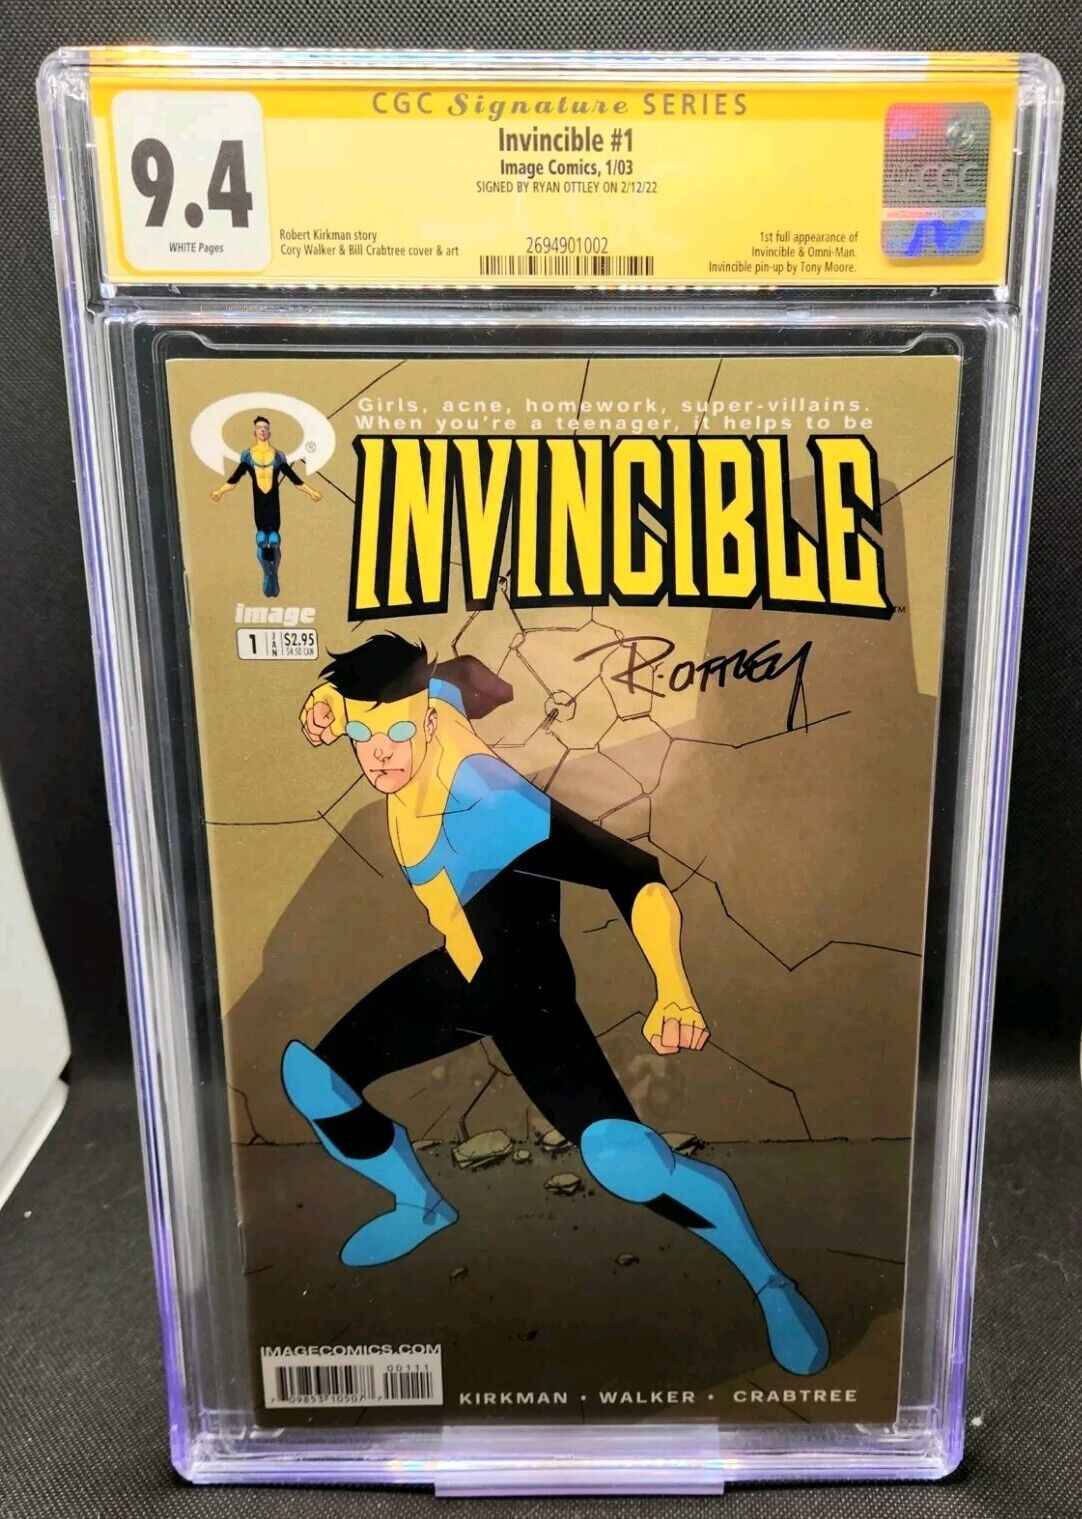 🔥Invincible # 1 CGC SS 9.4 WP Signed Ryan Ottley 1st Invincible Appearance🔥 